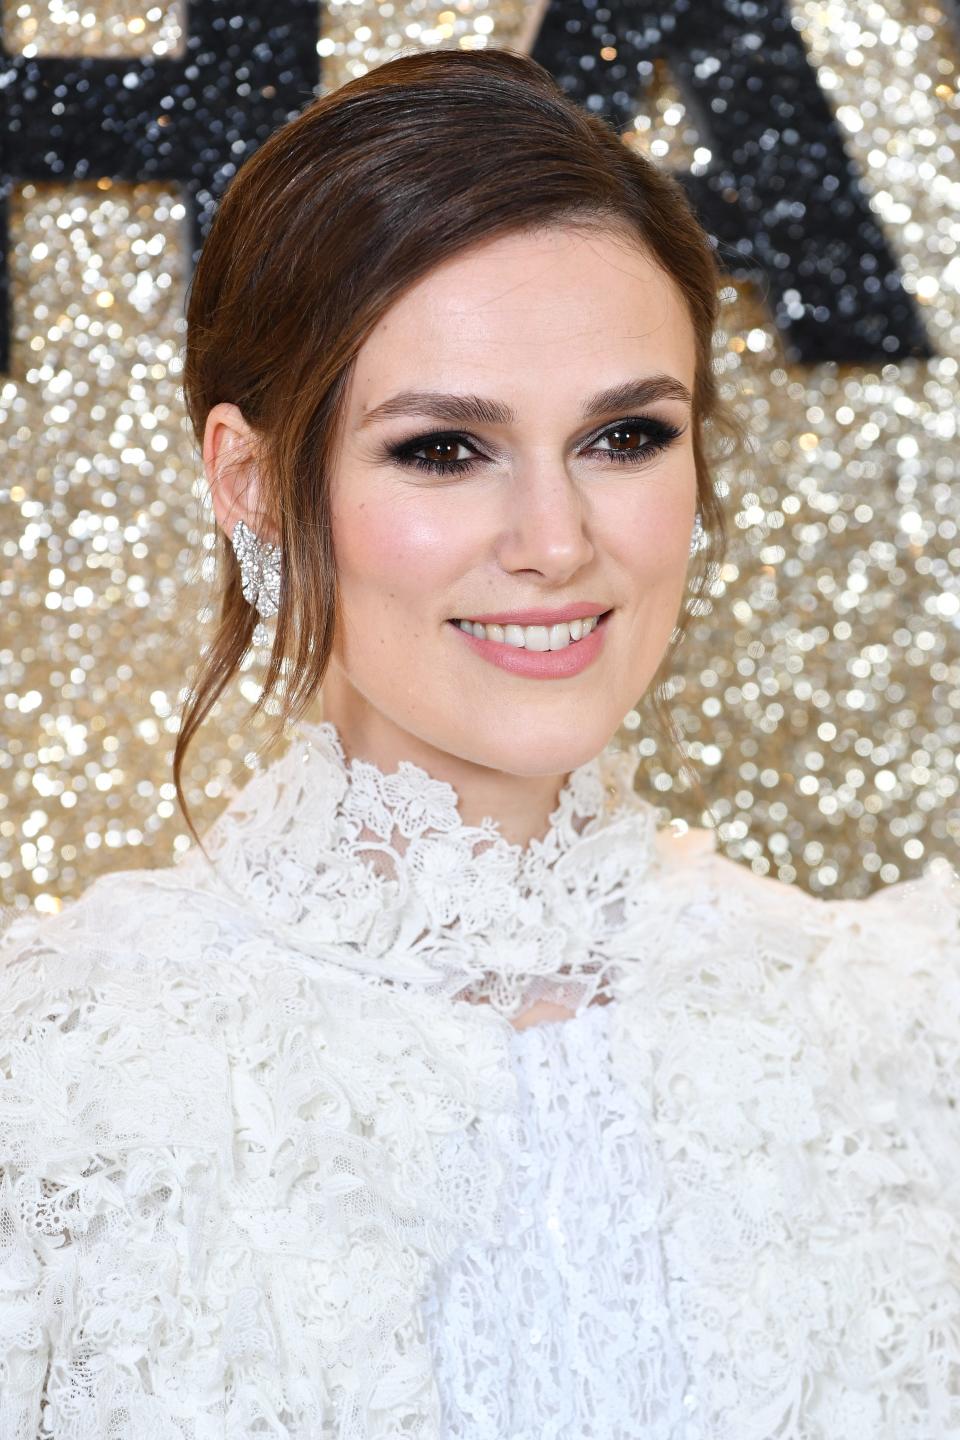 During an interview for the Chanel Connects podcast, Keira Knightley opened up about portraying women's experiences in film, revealing that she's uninterested in doing scenes with nudity unless they're made by a female filmmaker.